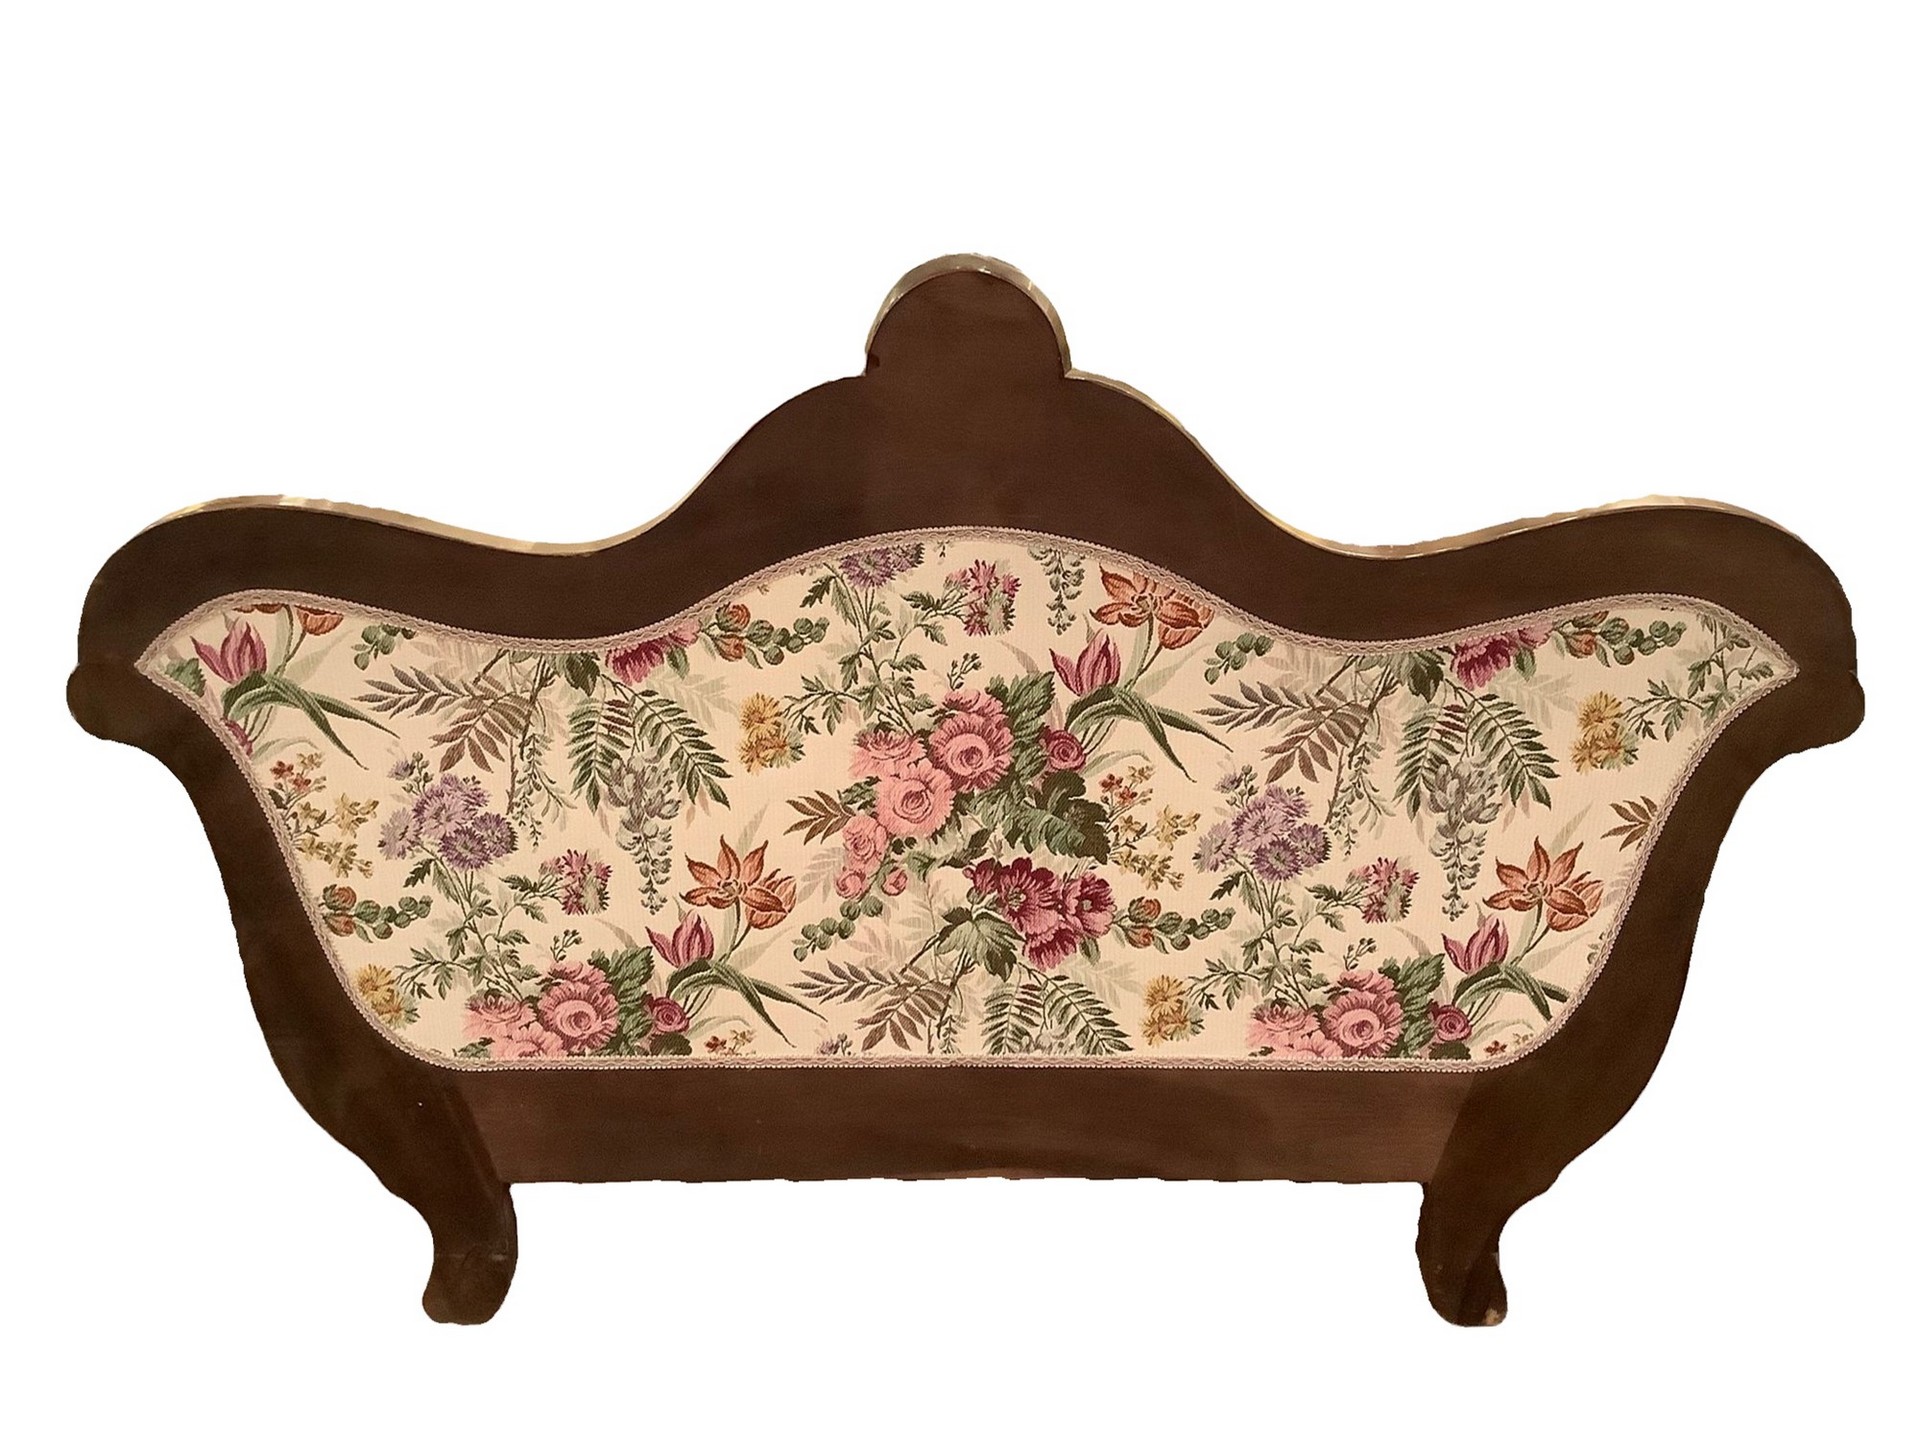 Two-seater sofa in Louis Philippe style walnut wood, early 20th century - Image 4 of 4